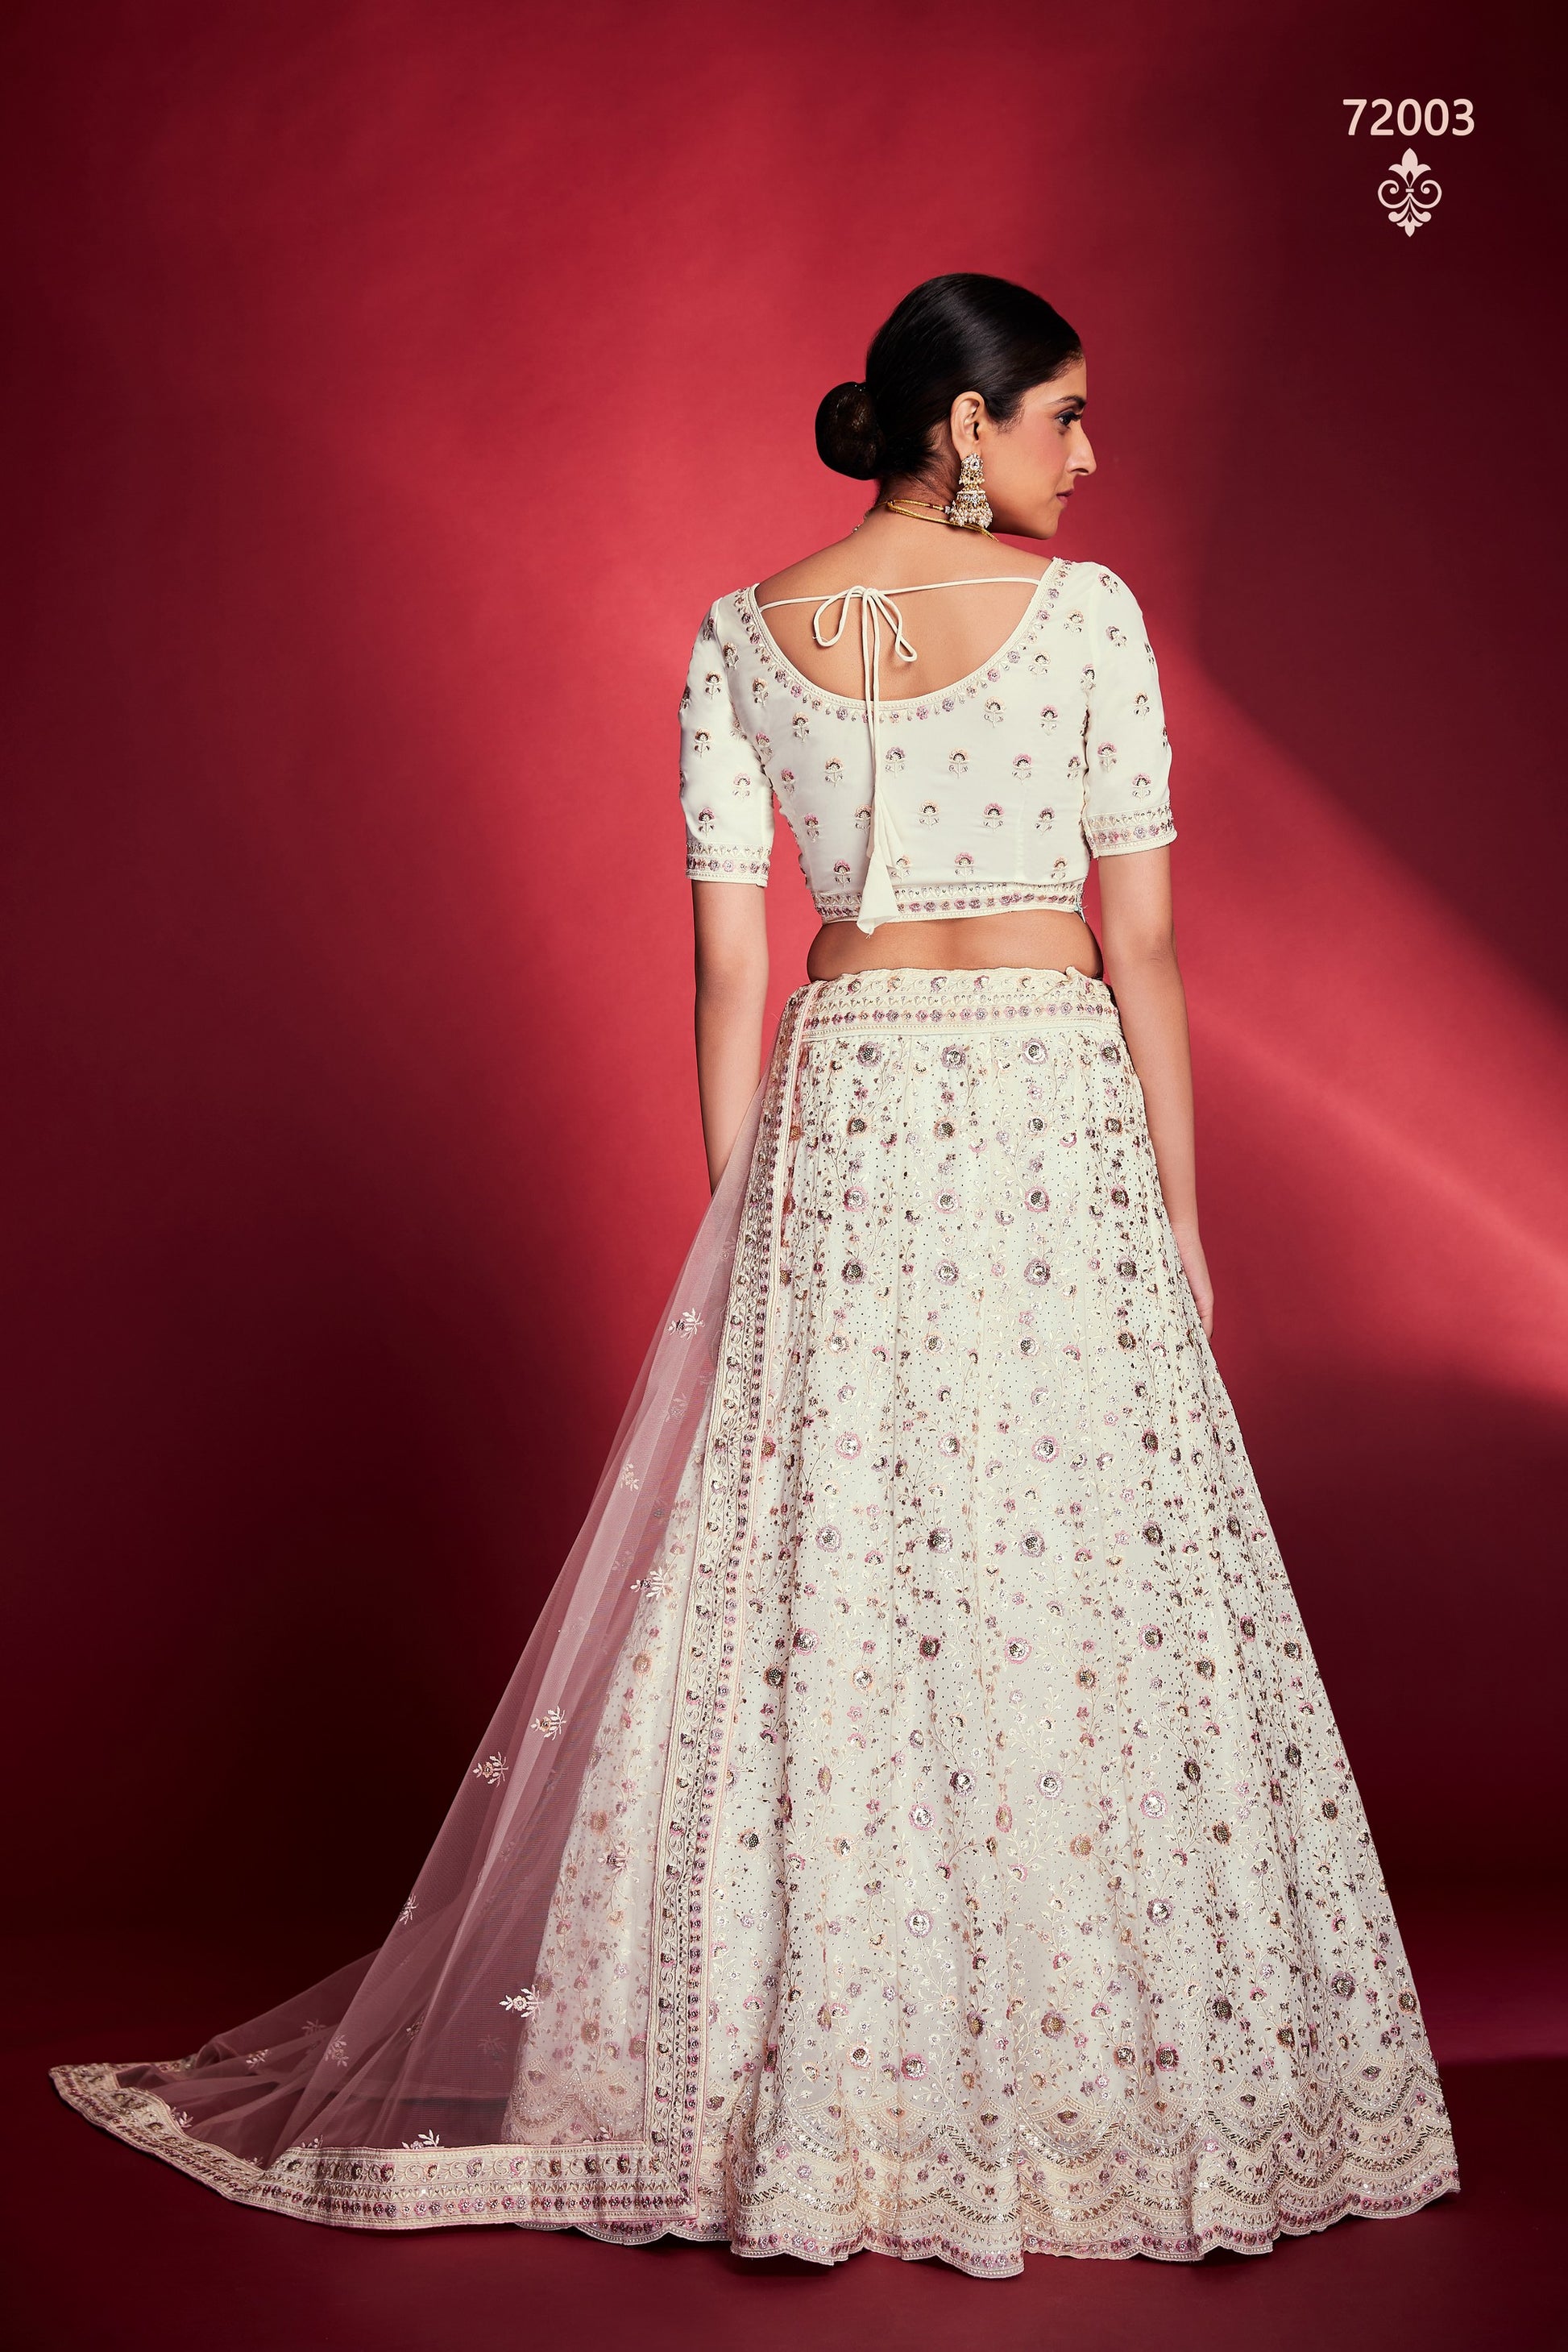 White Pakistani Georgette Lehenga Choli For Indian Festivals & Weddings - Sequence Embroidery Work, Thread Embroidery Work, Zari Work, Swarovski Work